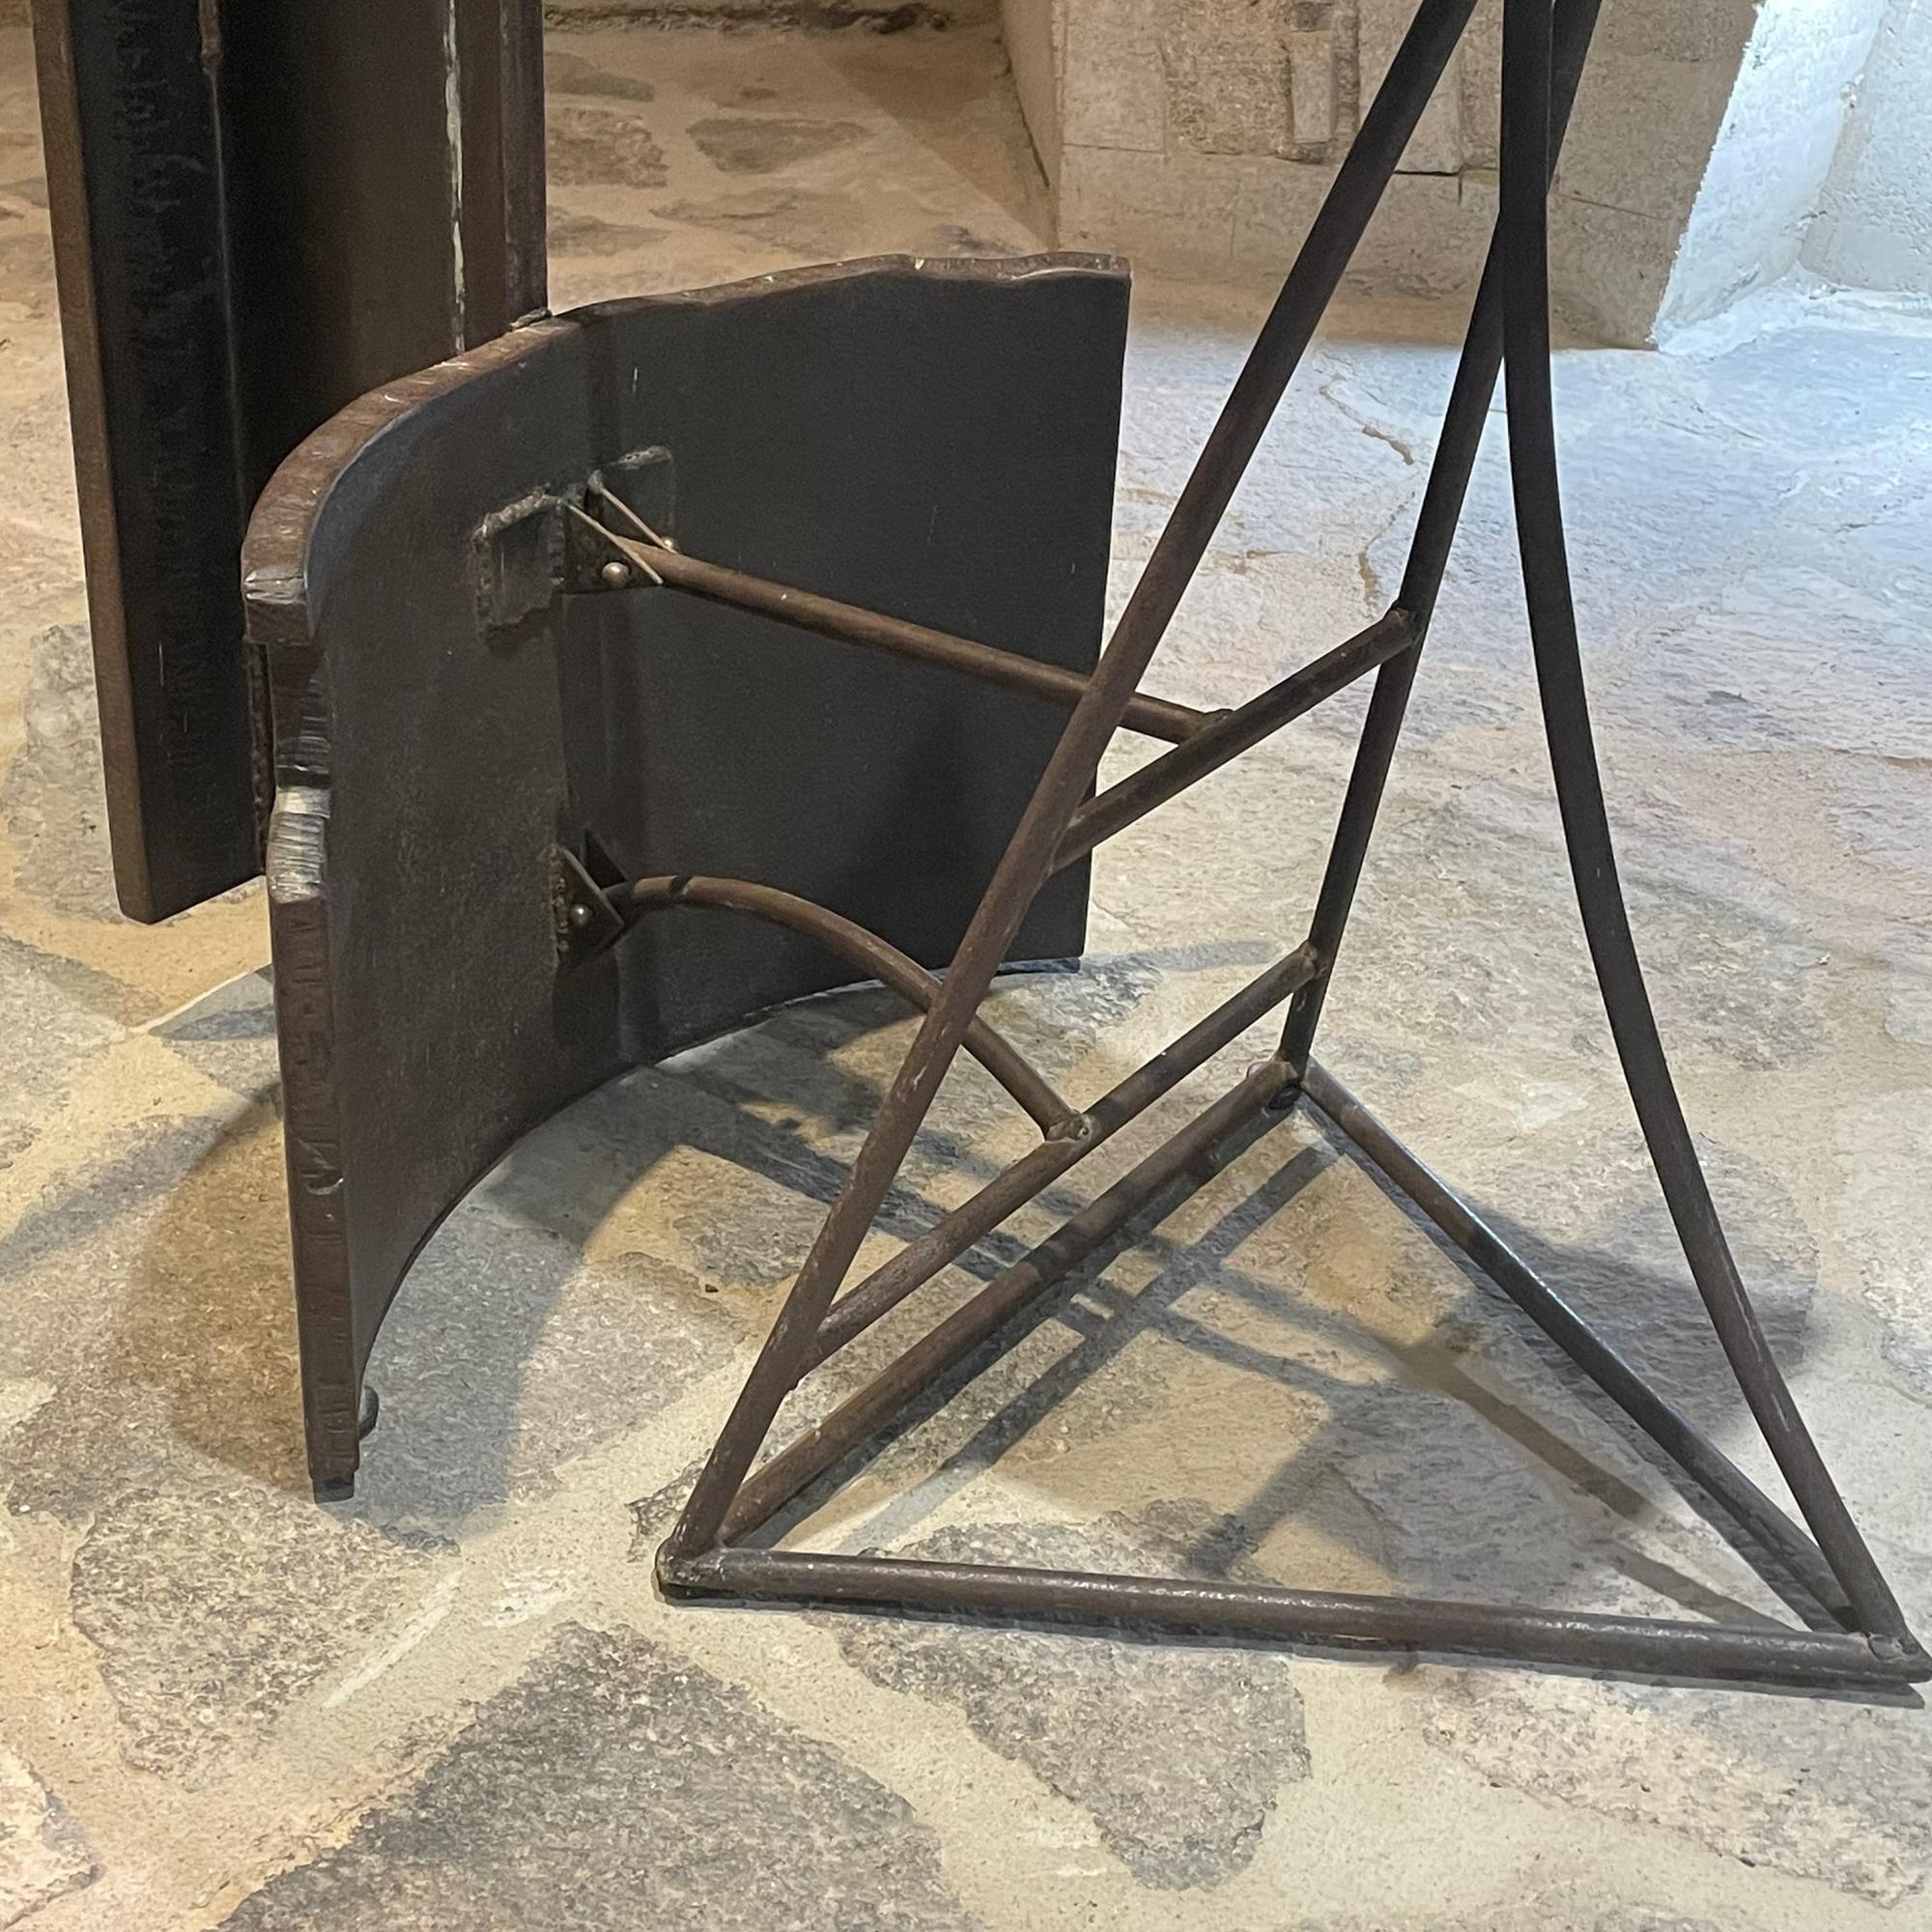 1970s Striking Brutalism by Jaime Artigas Sculptural Art Solid Iron Metal Desk In Good Condition For Sale In Chula Vista, CA